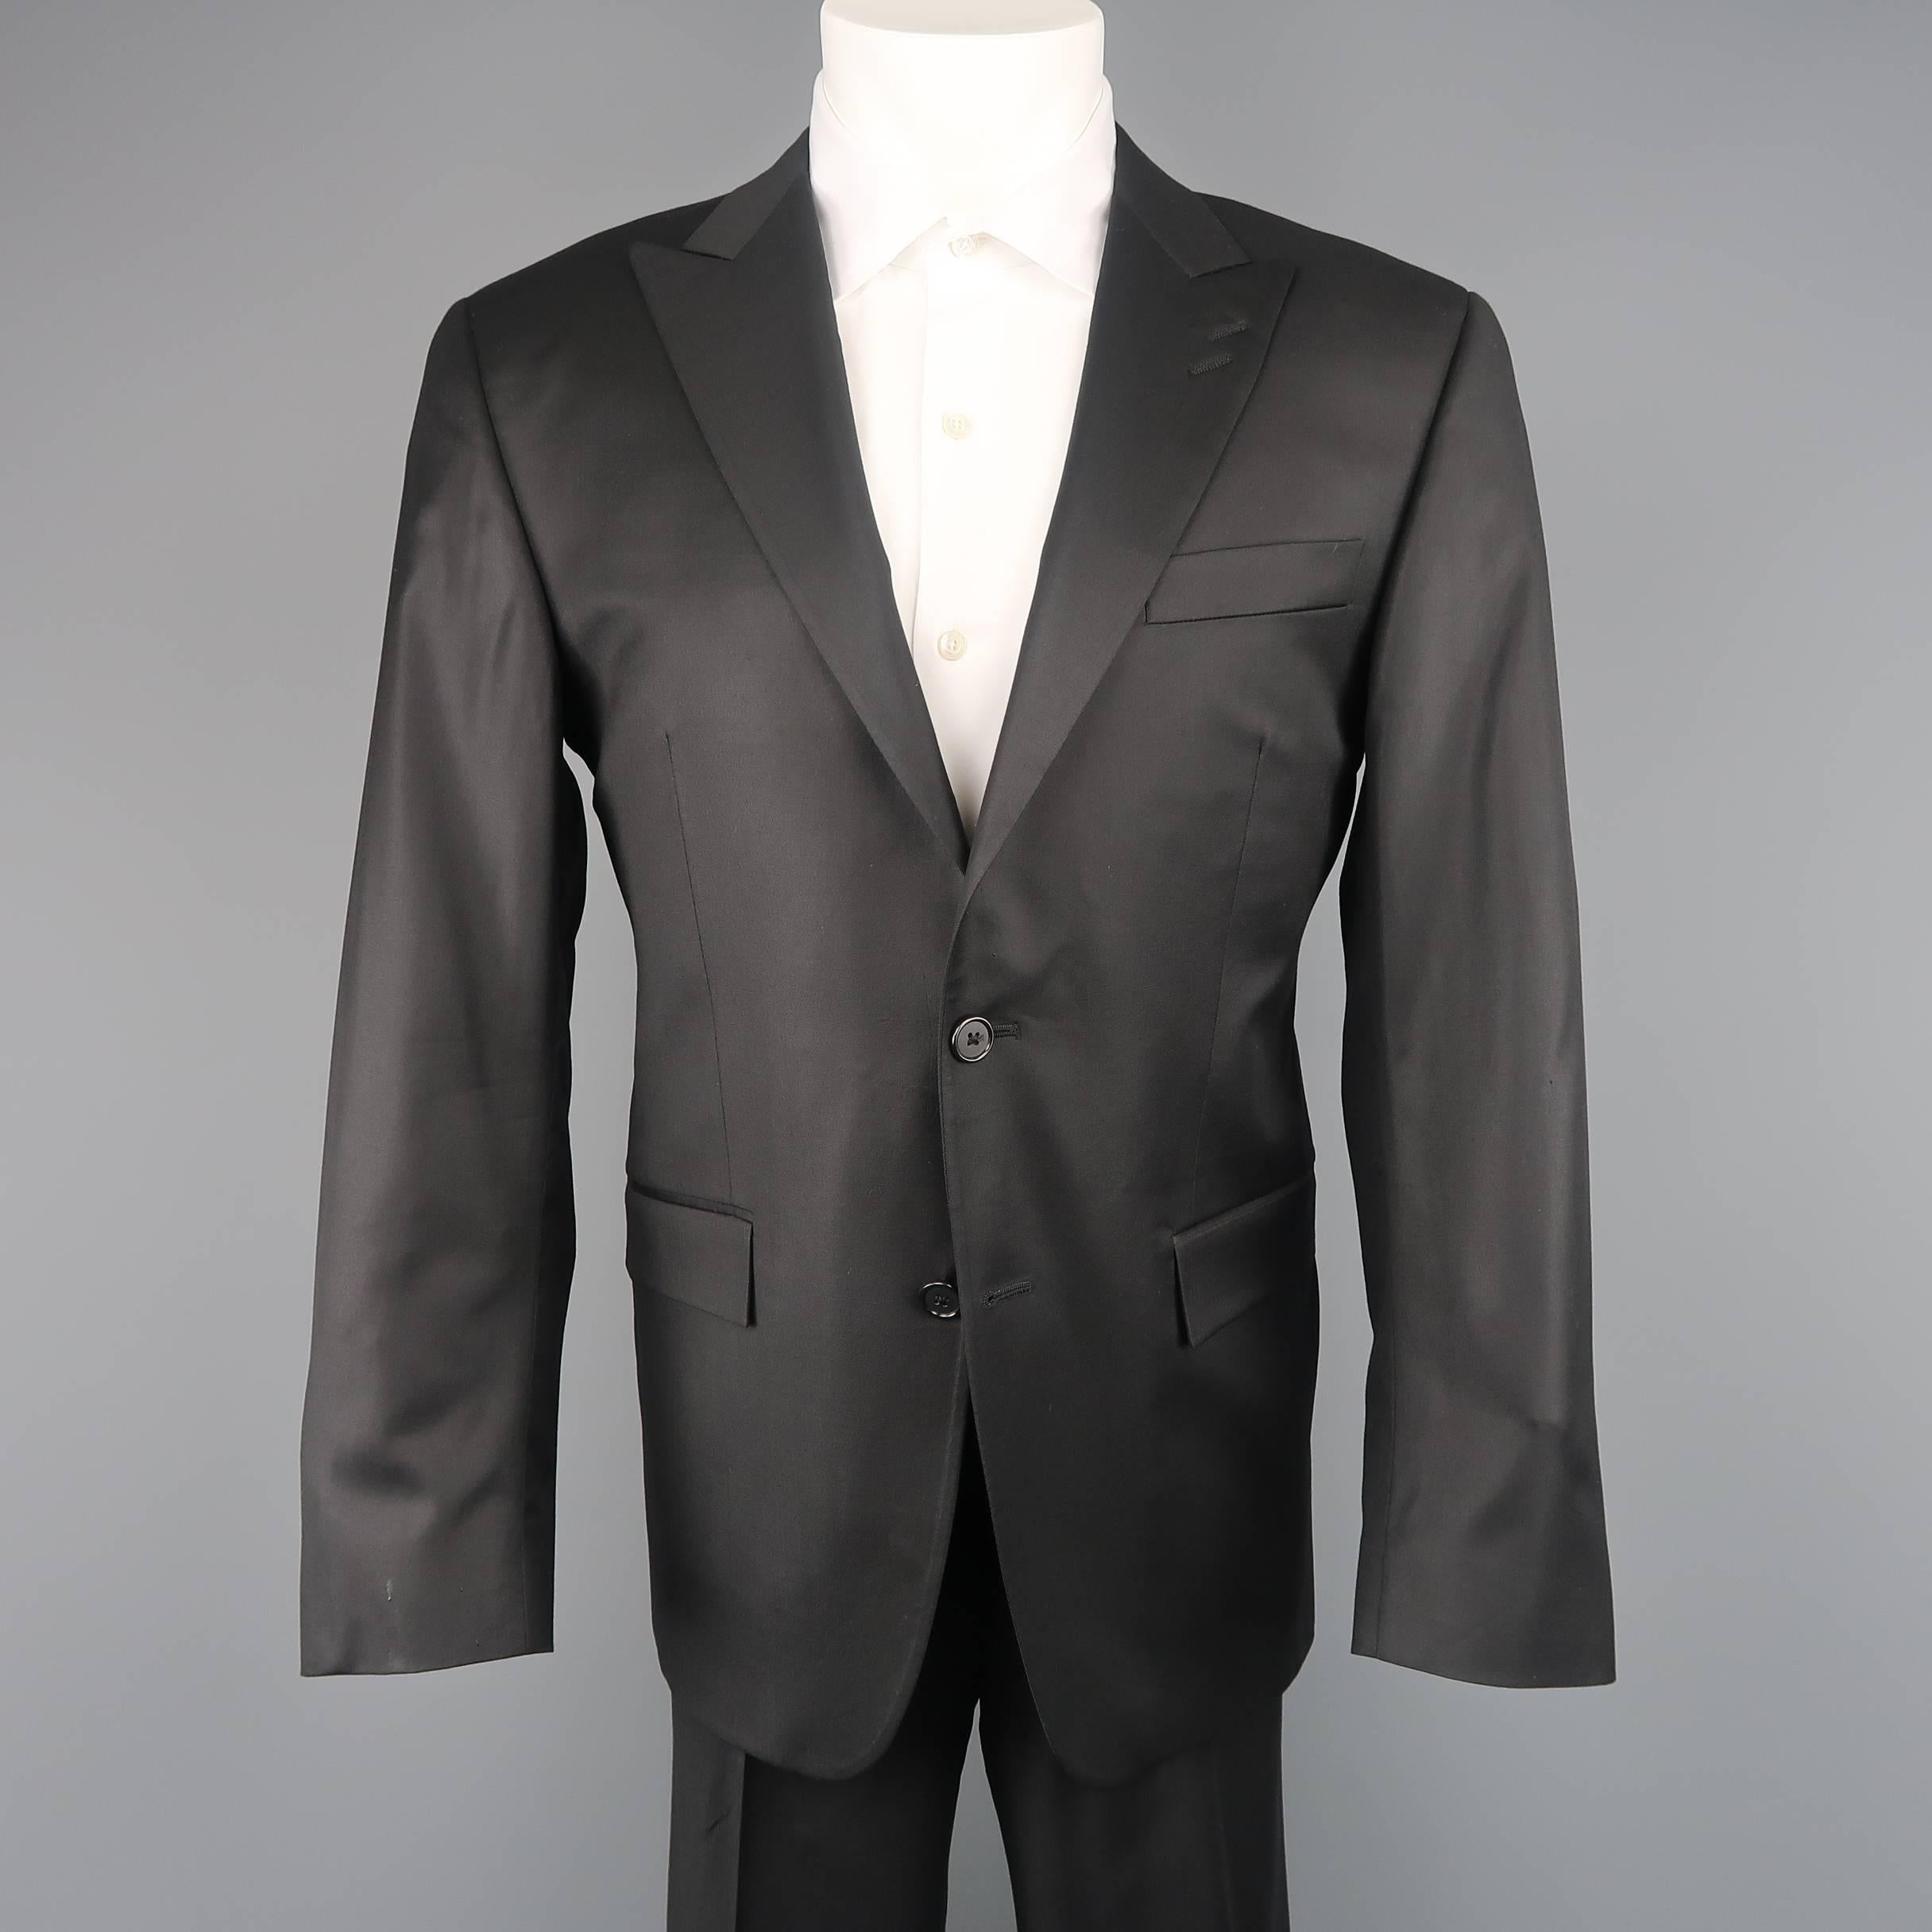 Two piece suit by SPURR comes in black wool with a subtle sheen and includes a single breasted two button sport coat with peak lapel and matching flat front trousers.  Made in USA.
 
Excellent Pre-Owned Condition.
Marked: 40 REG
 
Measurements:
